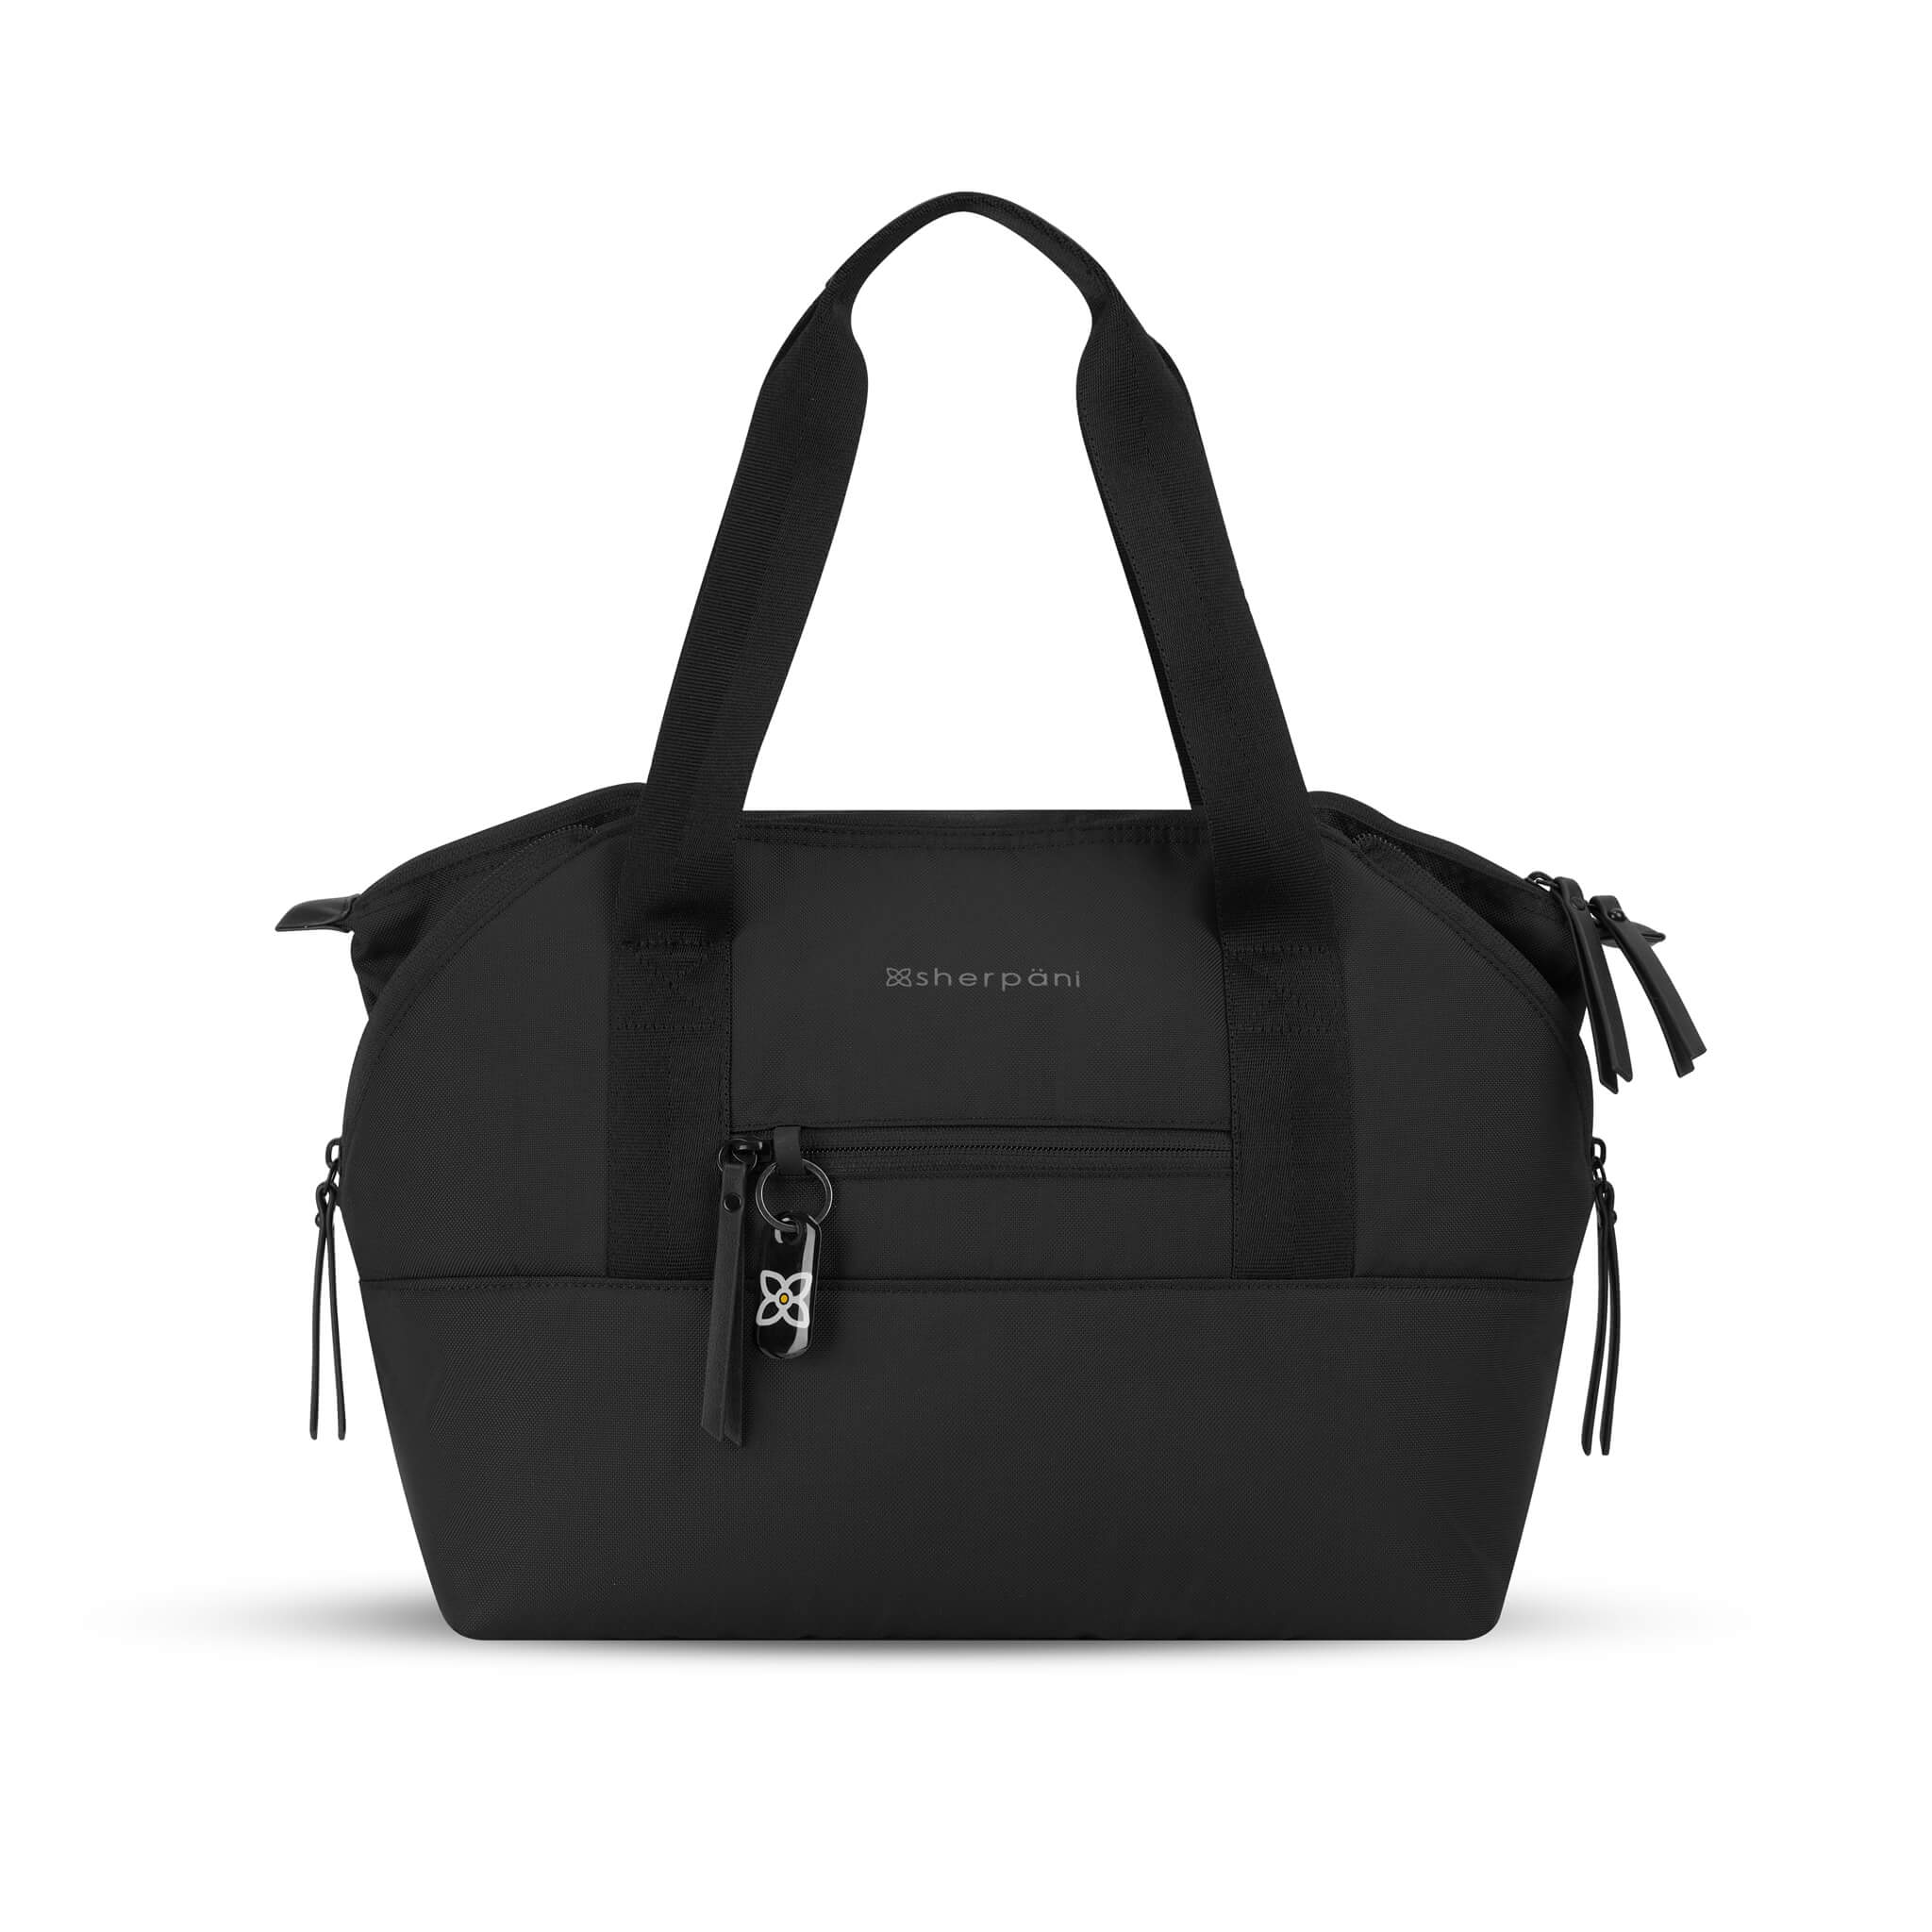 Flat front view of the Eclipse in Carbon, a true black color. This travel tote features a zipper pocket in each corner which makes the Eclipse an expandable bag. This Anti-Theft purse is sustainably made from recycled materials including post consumer plastic and vegan leather. 